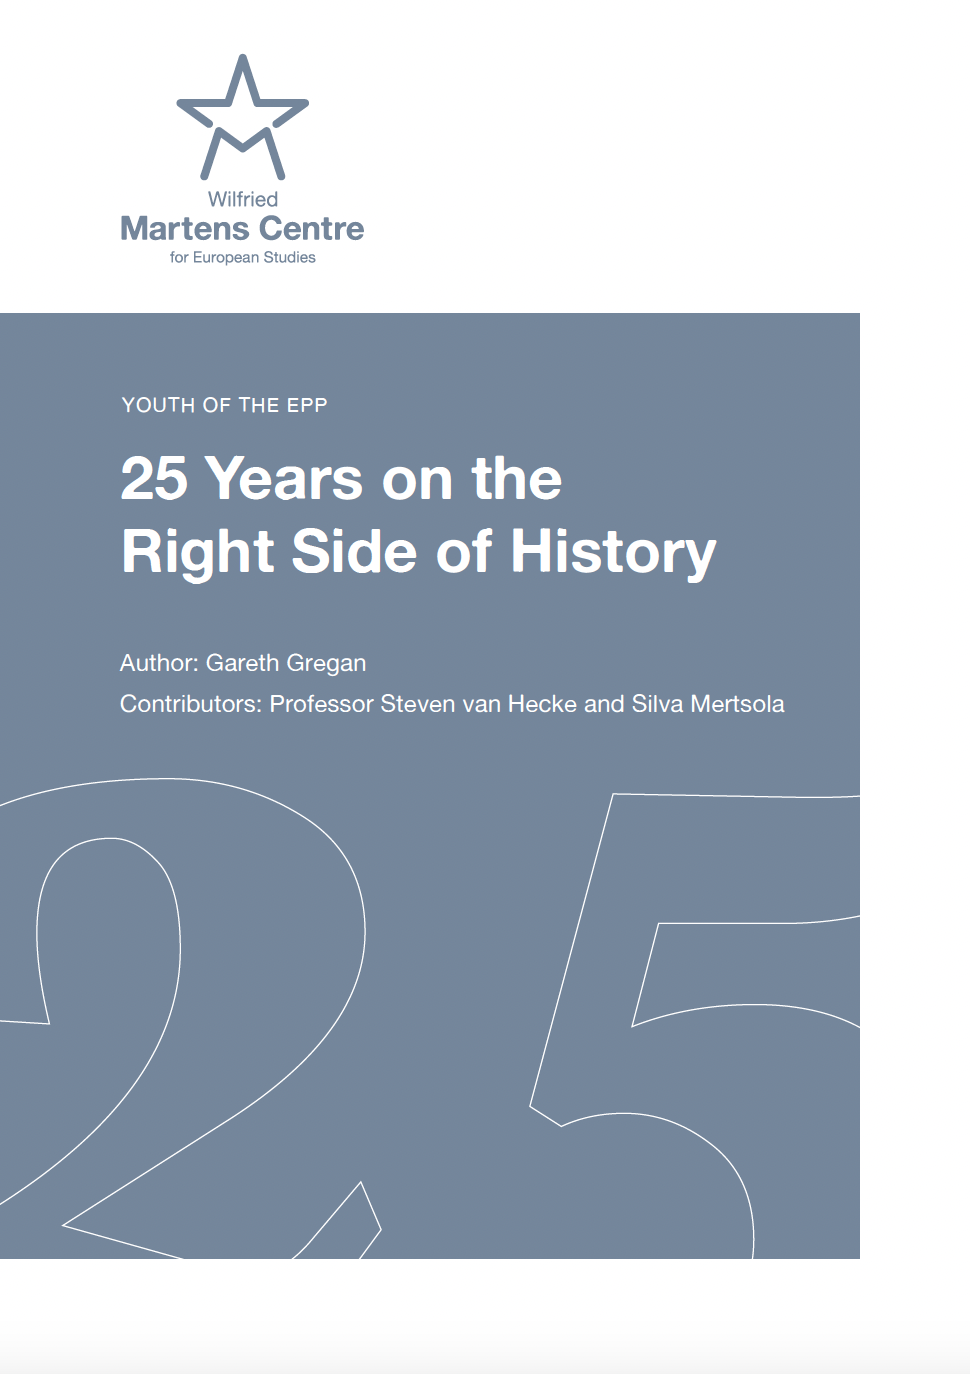 Youth of the EPP: 25 Years on the Right Side of History